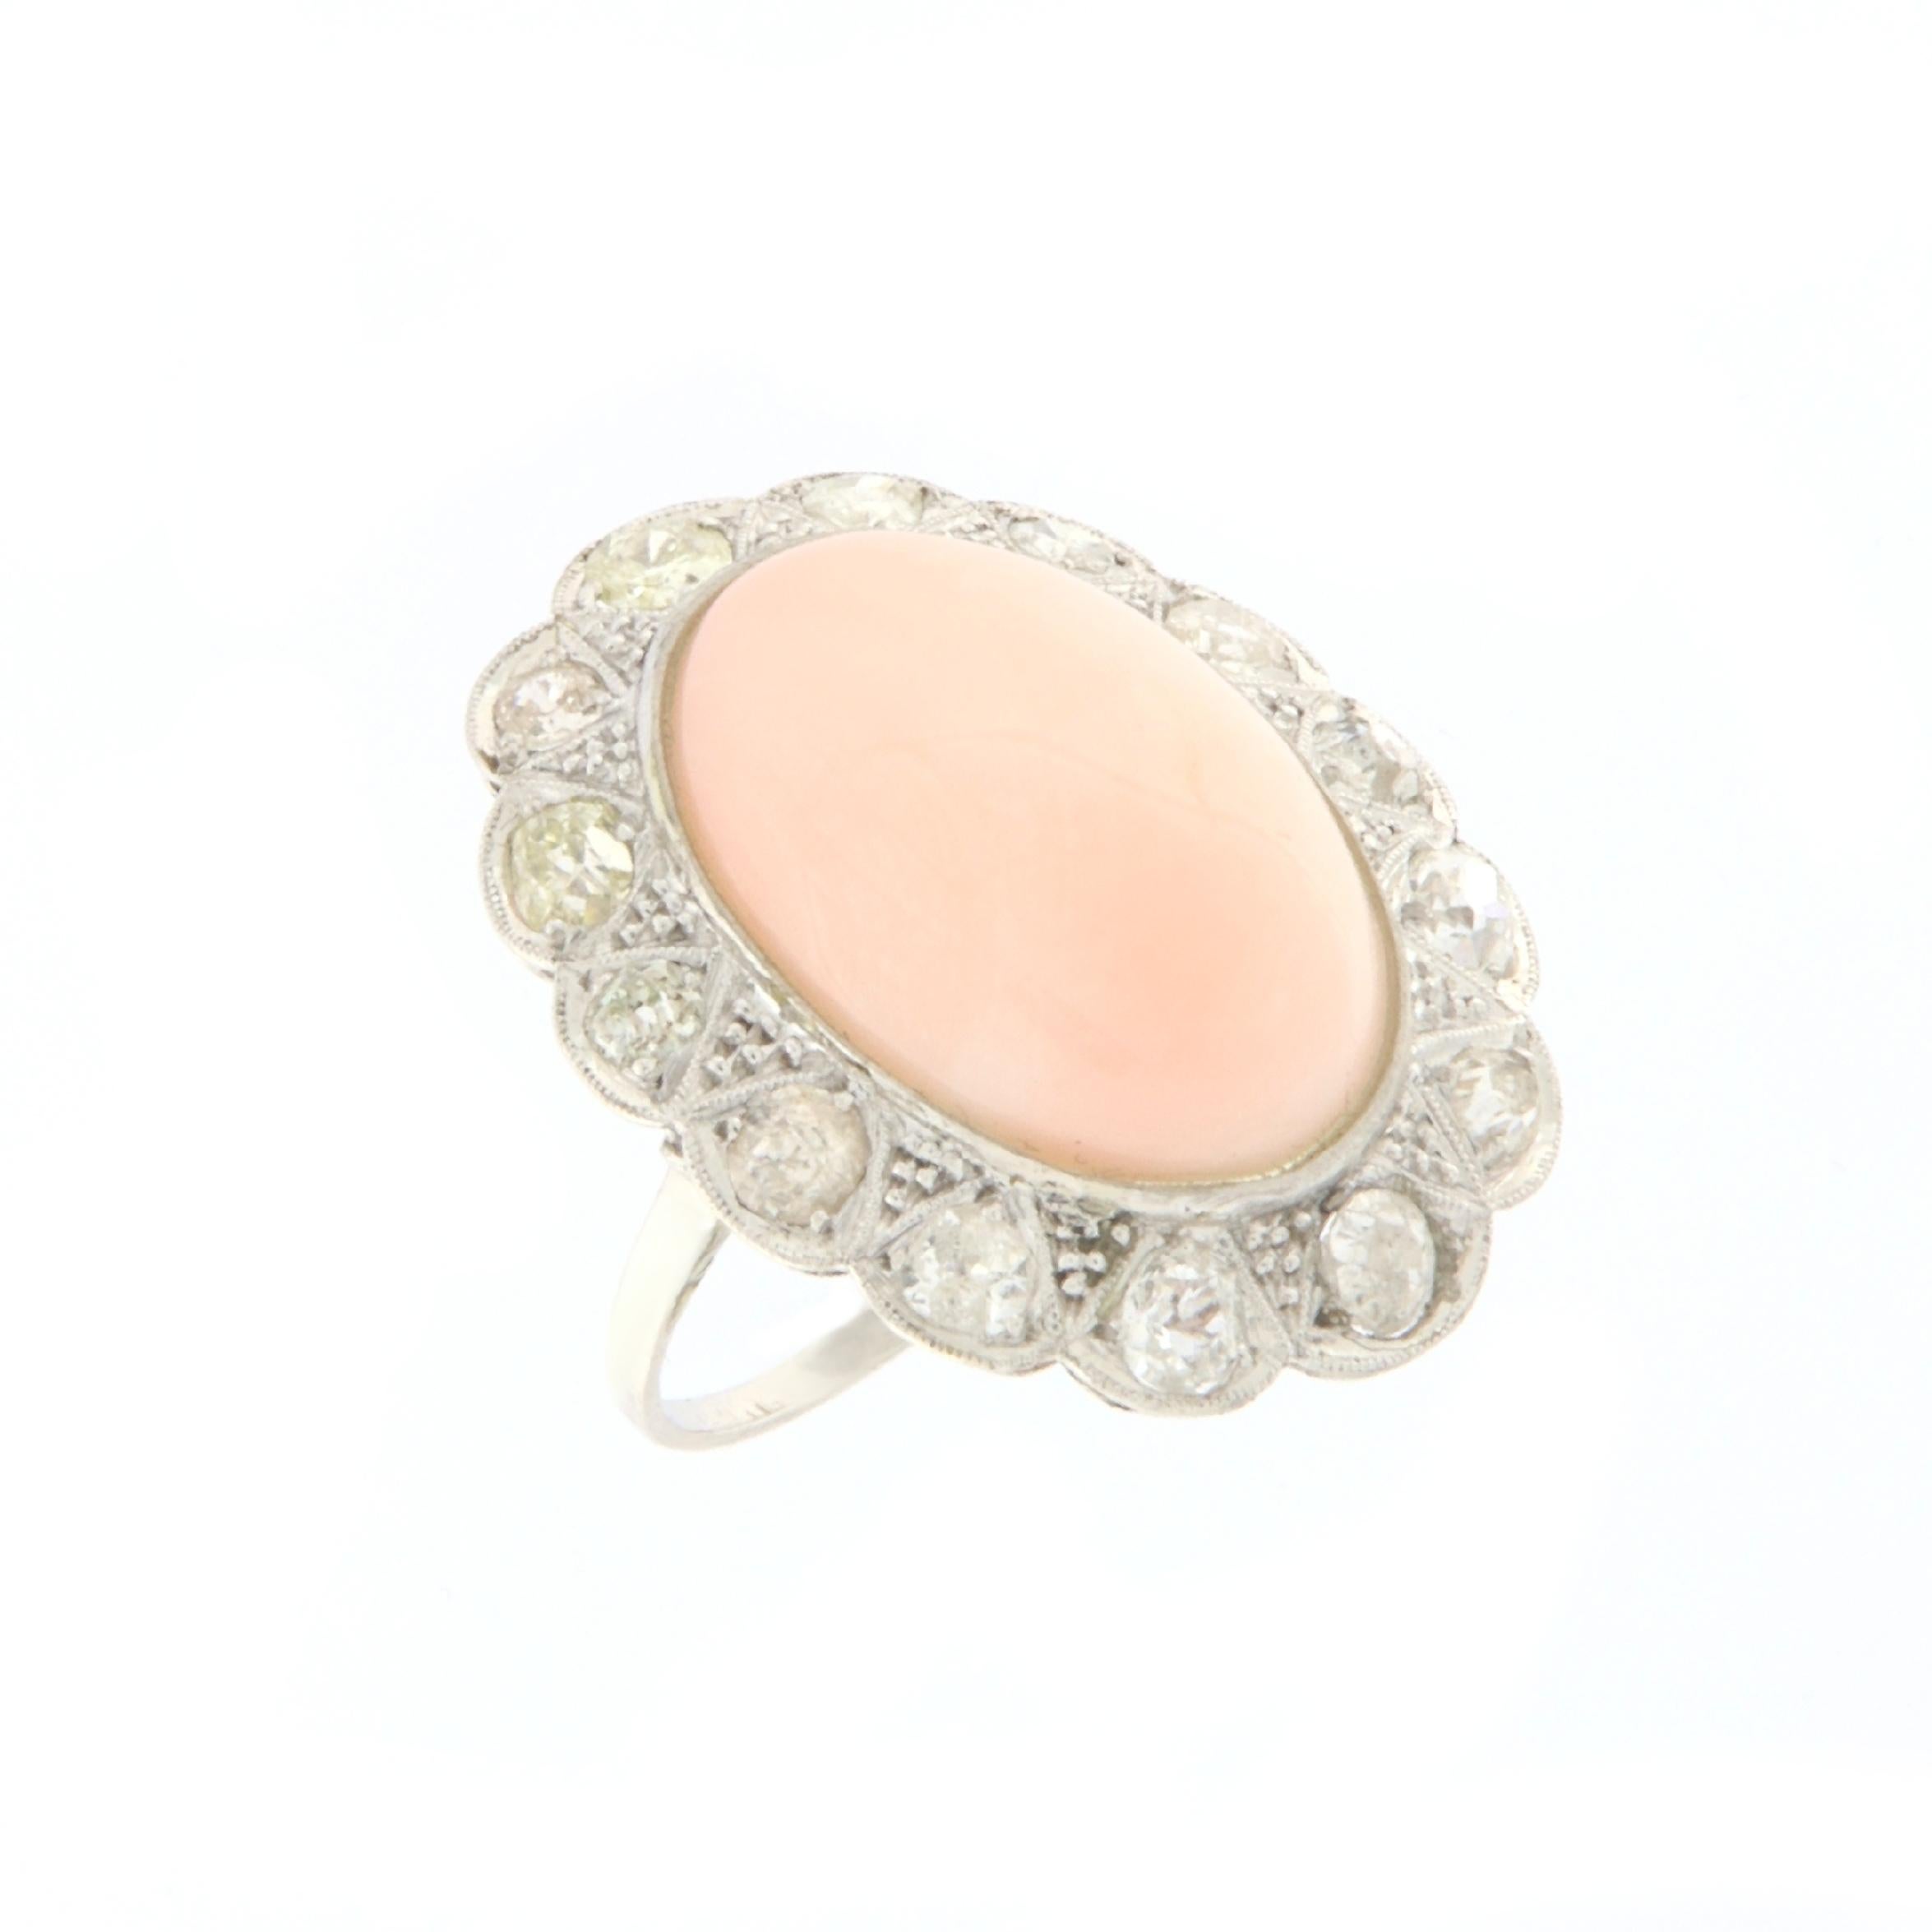 This exquisite ring in 18-karat white gold evokes the timeless elegance of antique style, offering a perfect balance between classicism and contemporary charm. At the heart of this majestic creation stands a spindle of pink coral, chosen for its